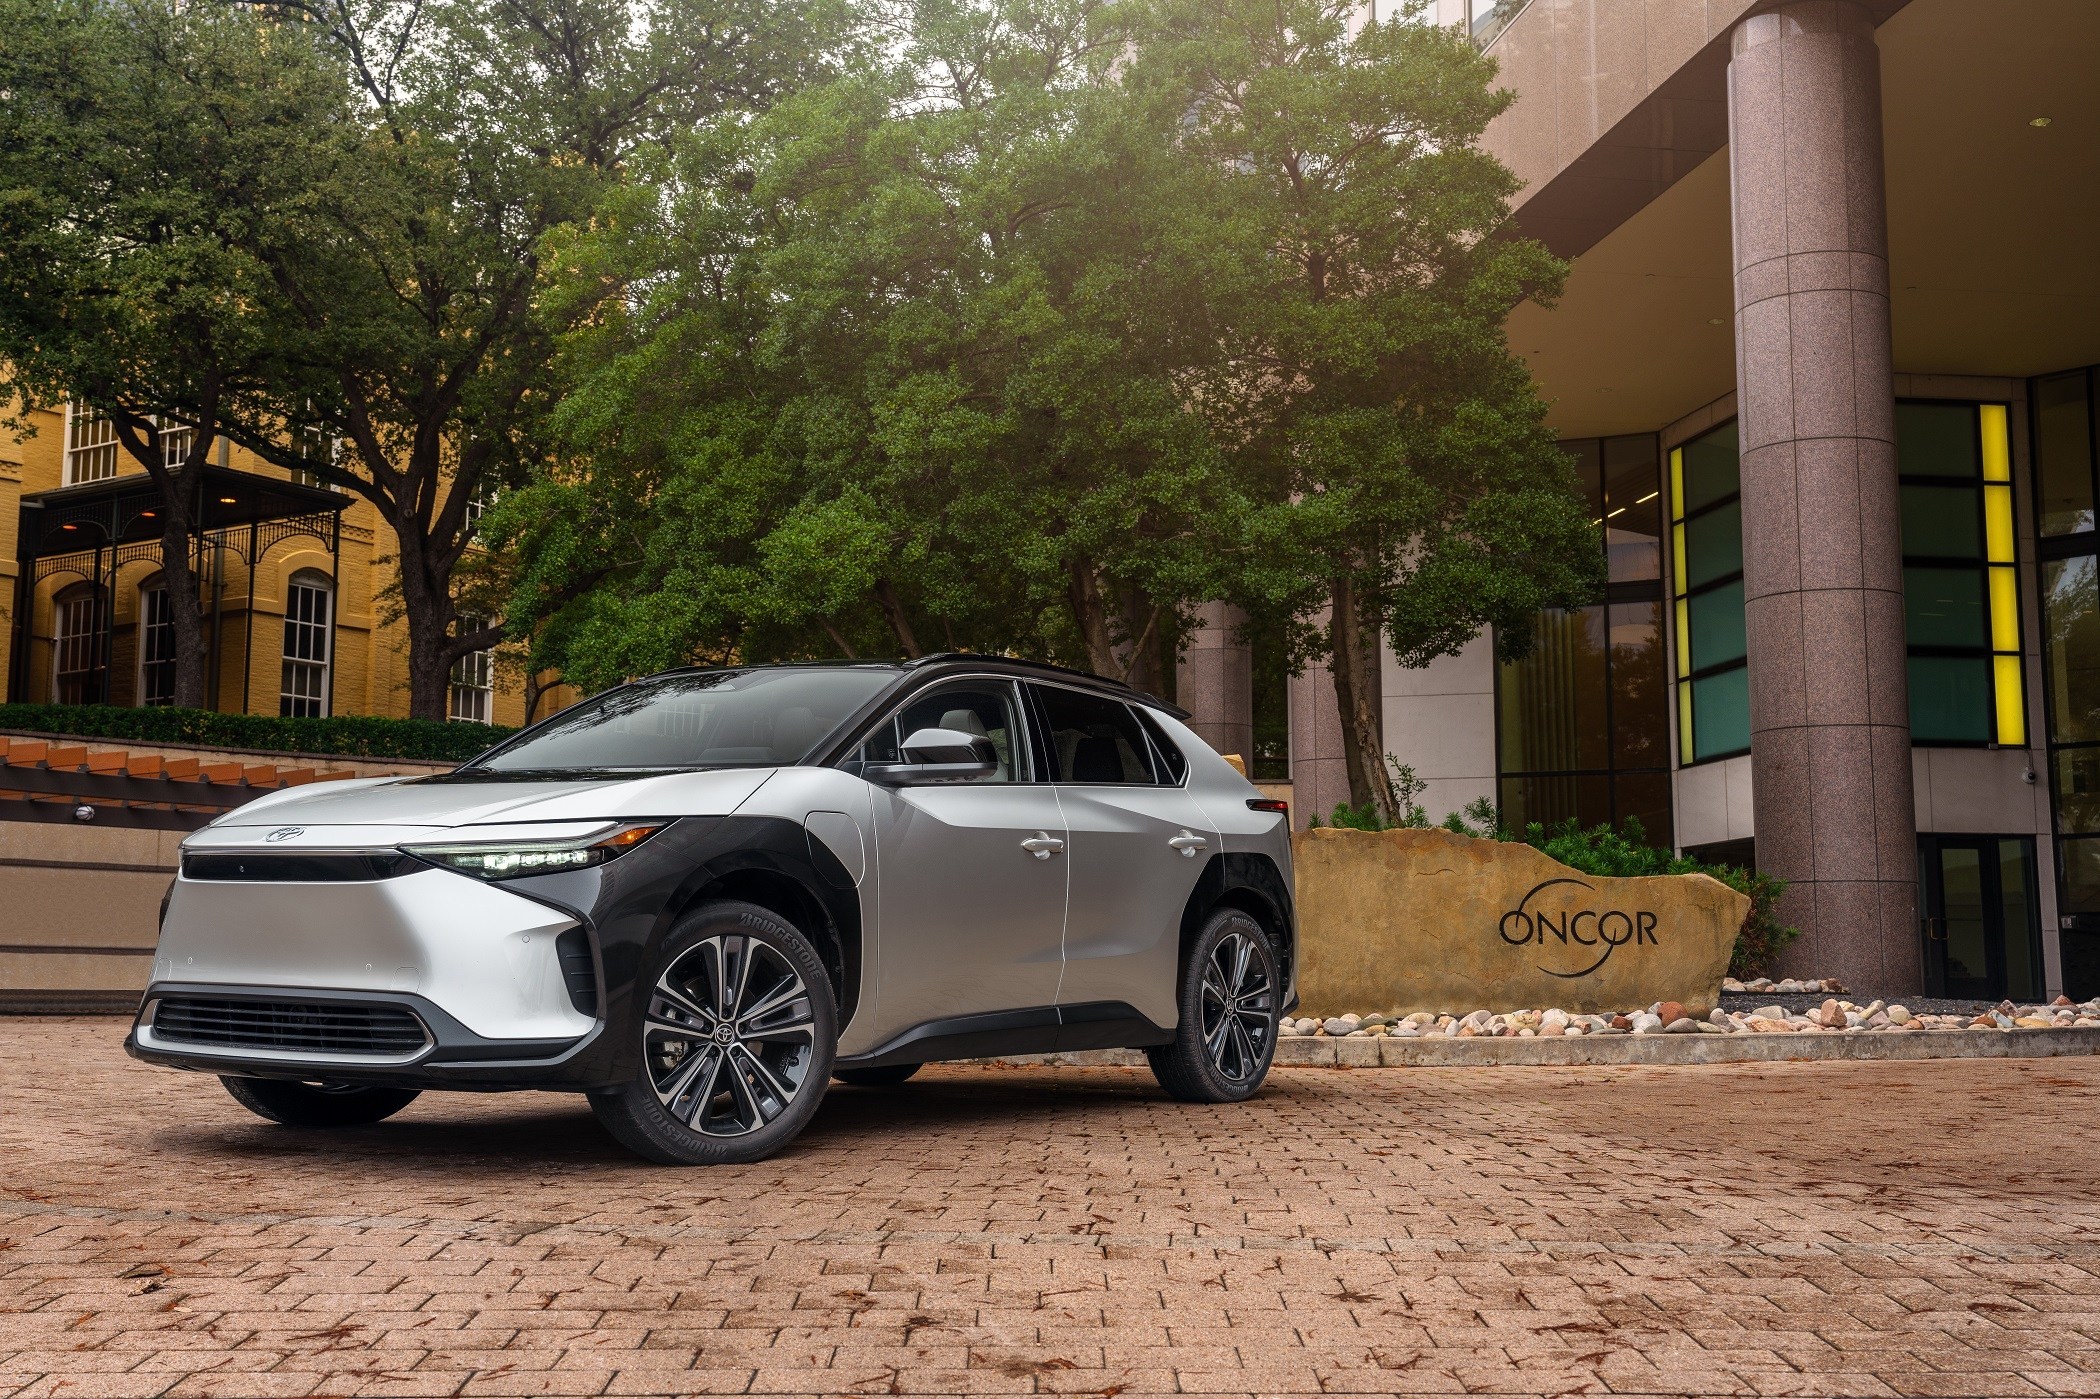 Toyota Announces Collaboration with Oncor to Accelerate EV Charging Ecosystem